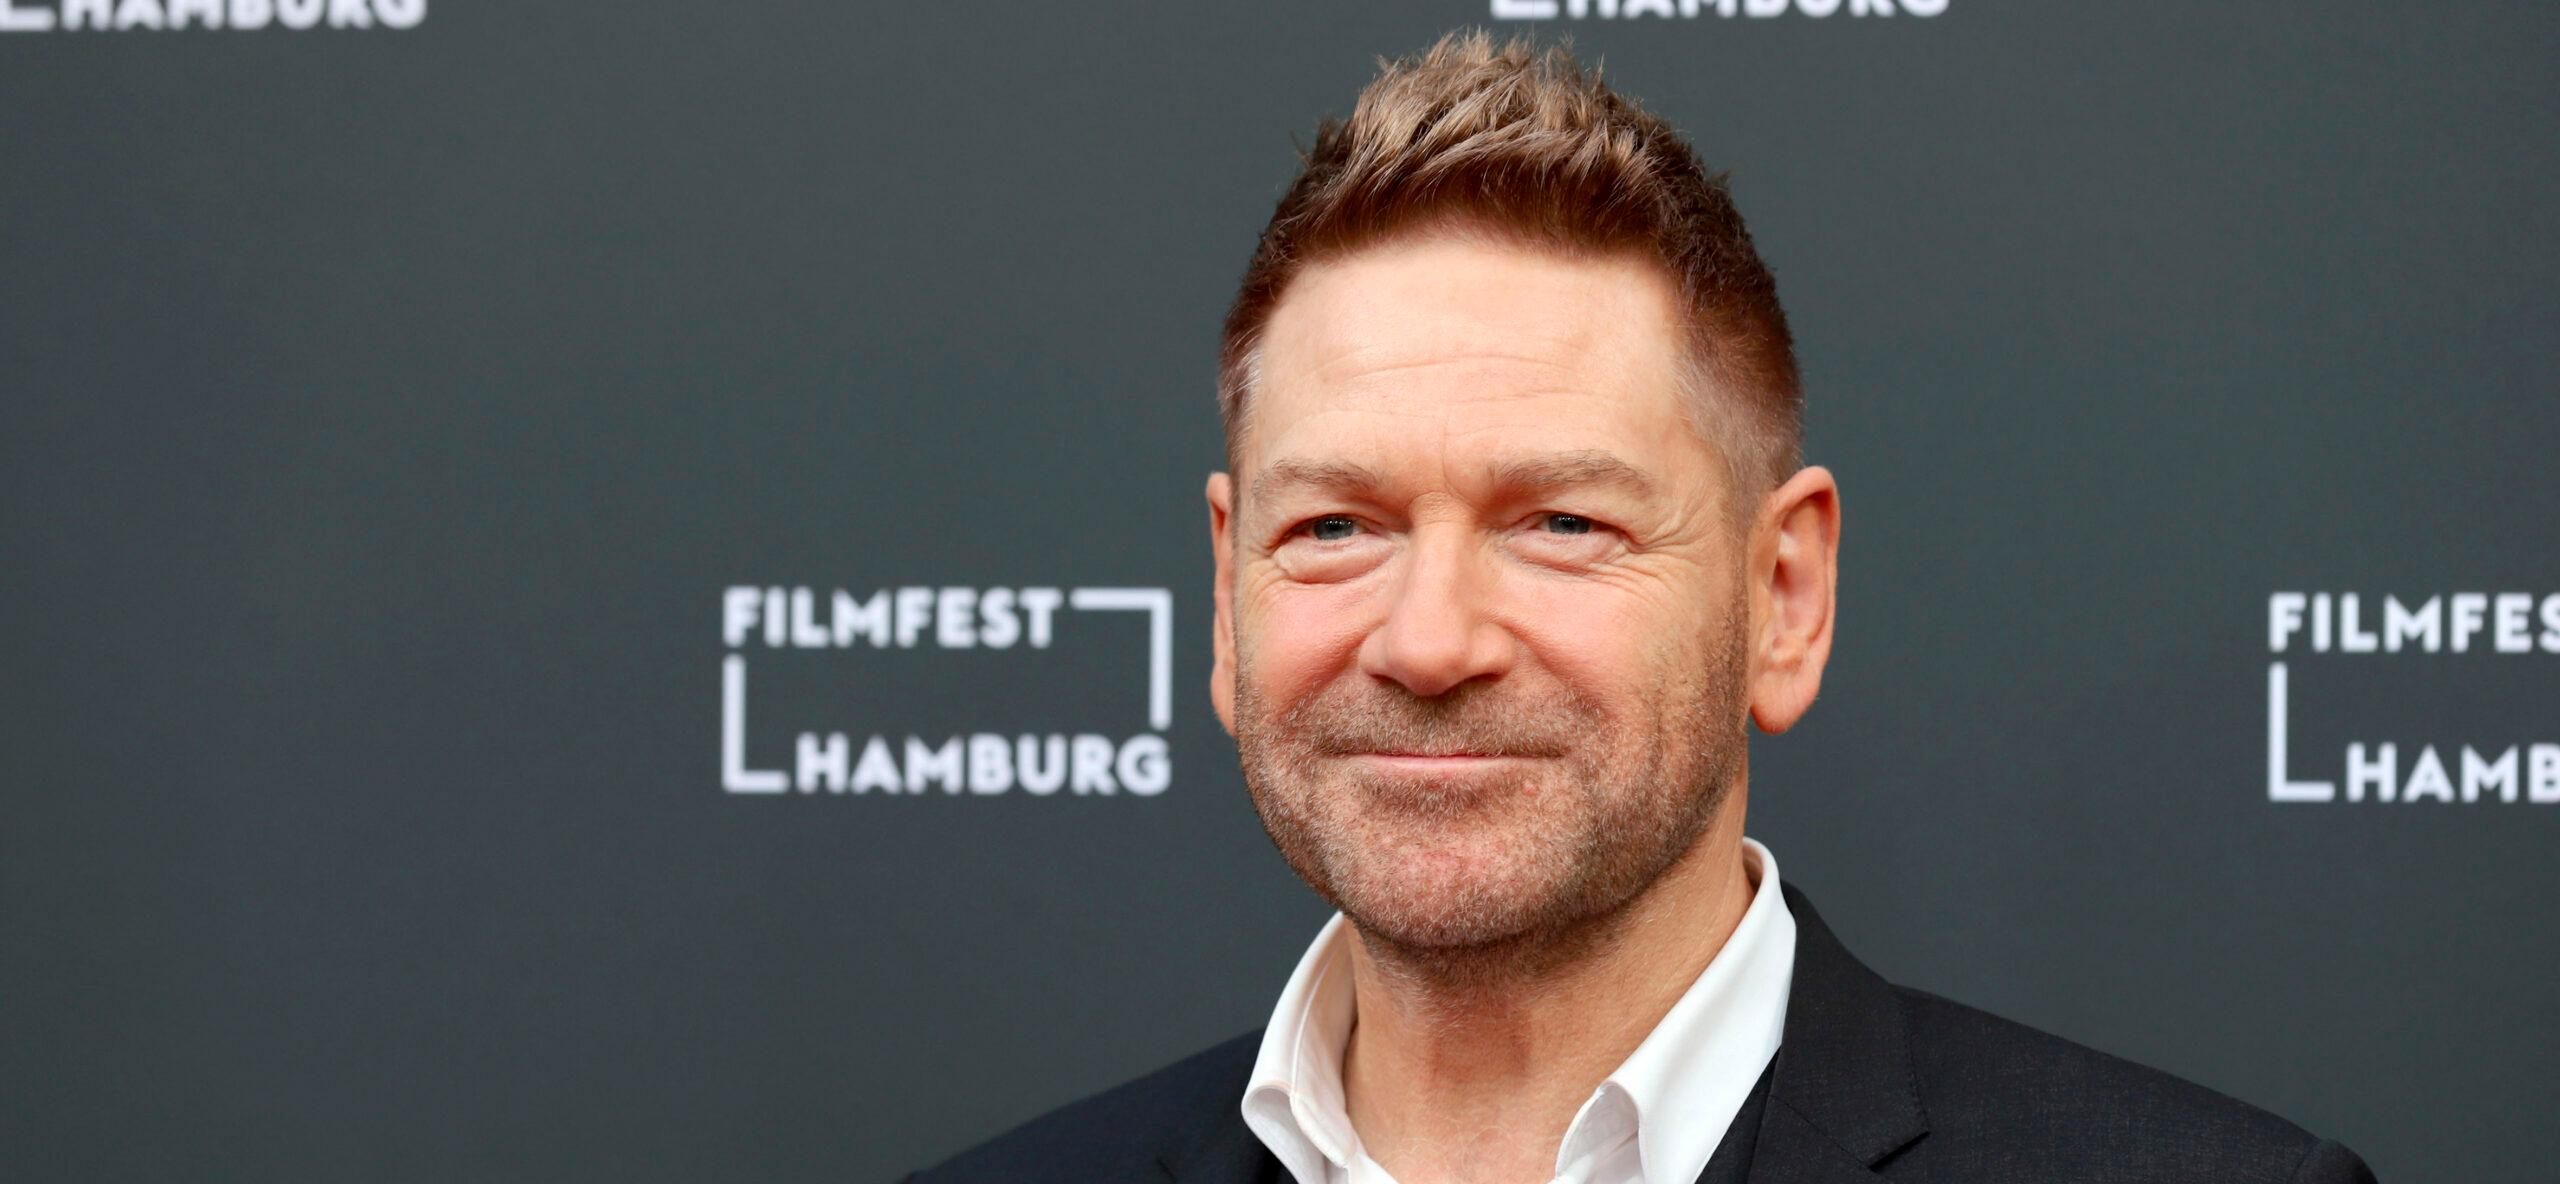 Kenneth Branagh at the "Belfast Premiere